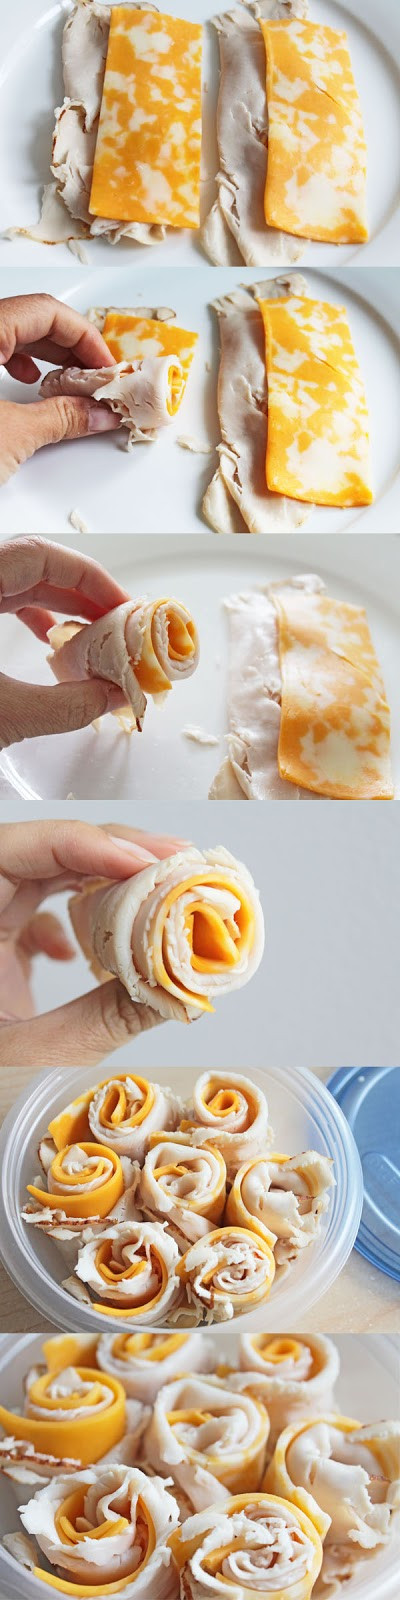 Healthy Snacks For Adults
 Easy to Make Snacks Turkey and Cheese Rolls Recipe